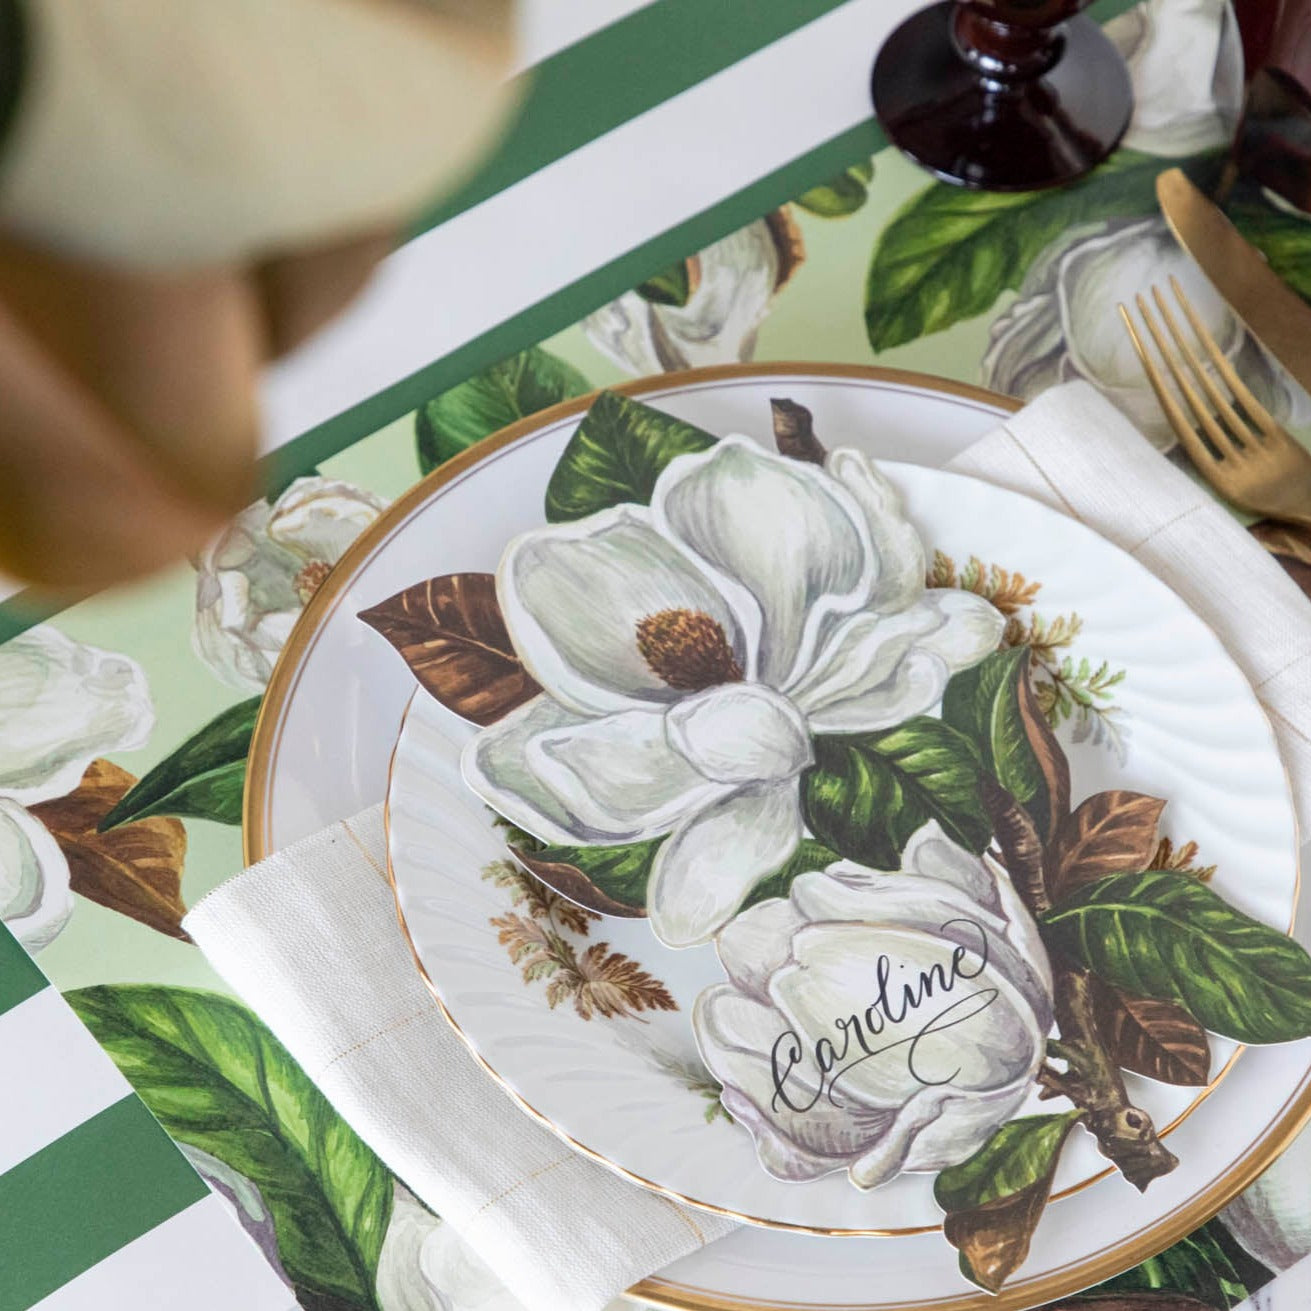 The Mint Magnolia Blooms Placemat under an elegant place setting.